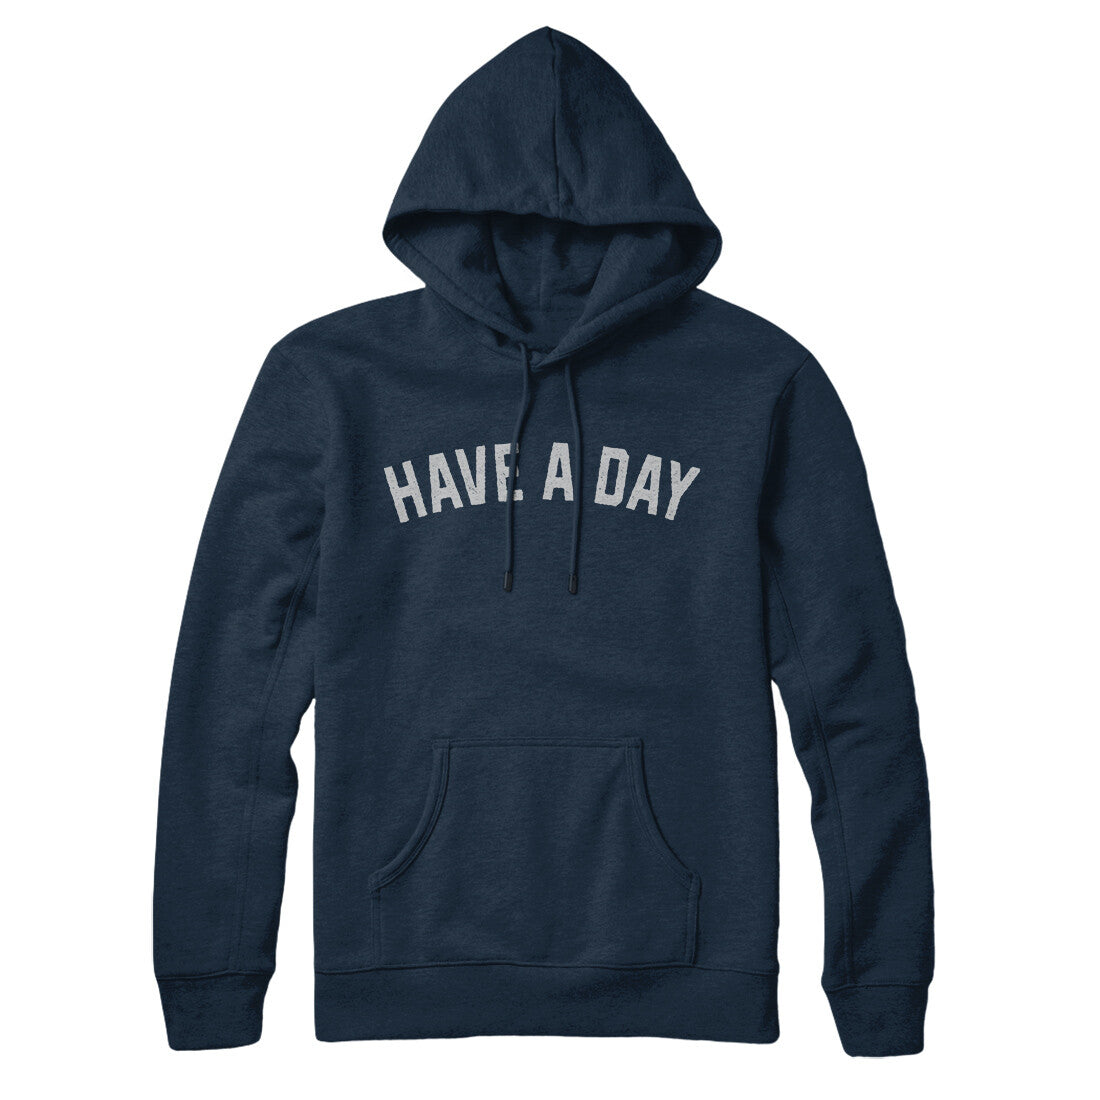 Have a Day in Navy Blue Color